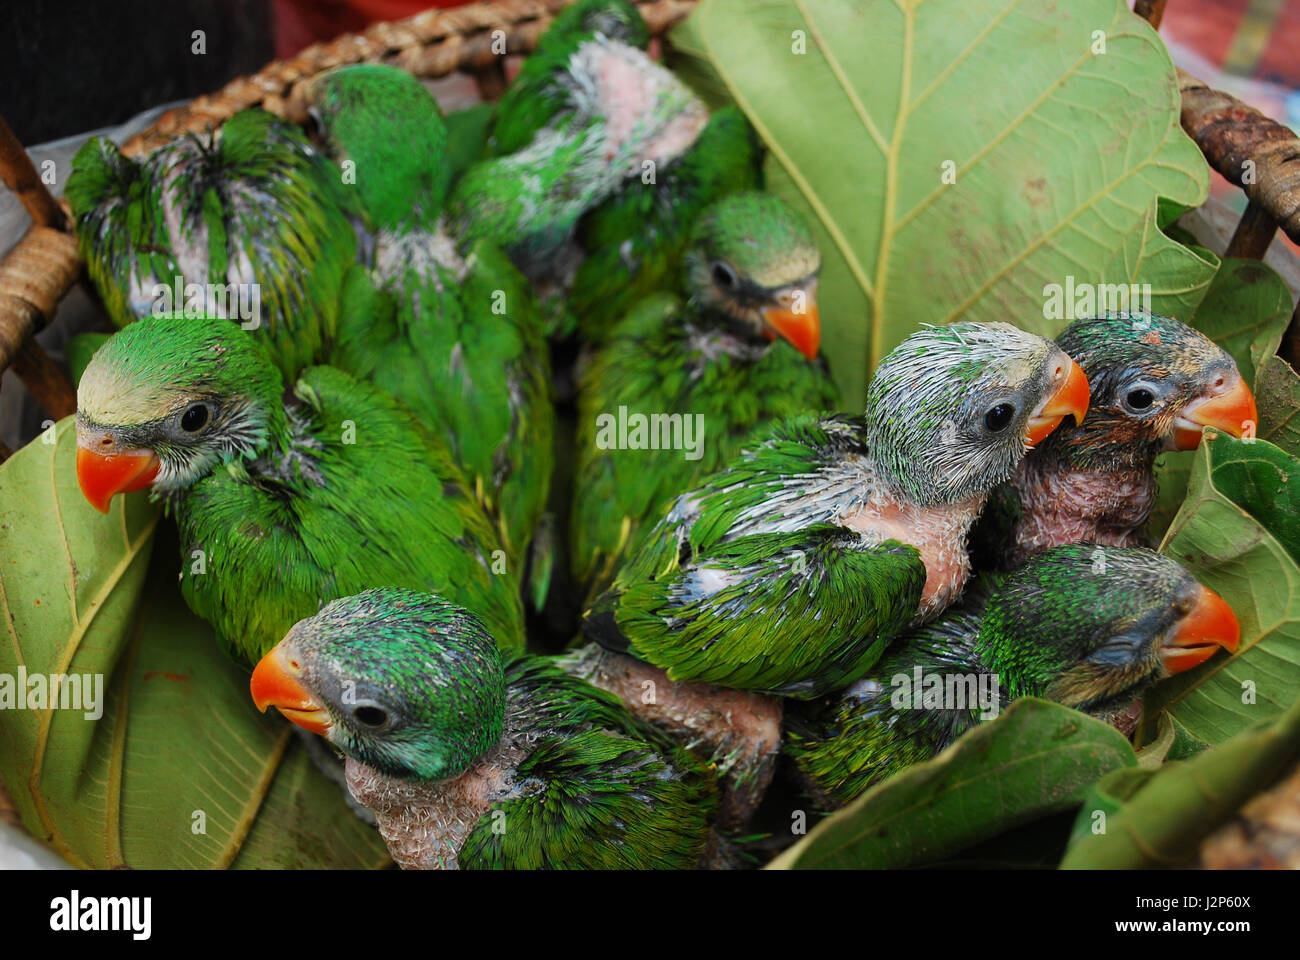 Baby green parrot birds in a basket Stock Photo - Alamy